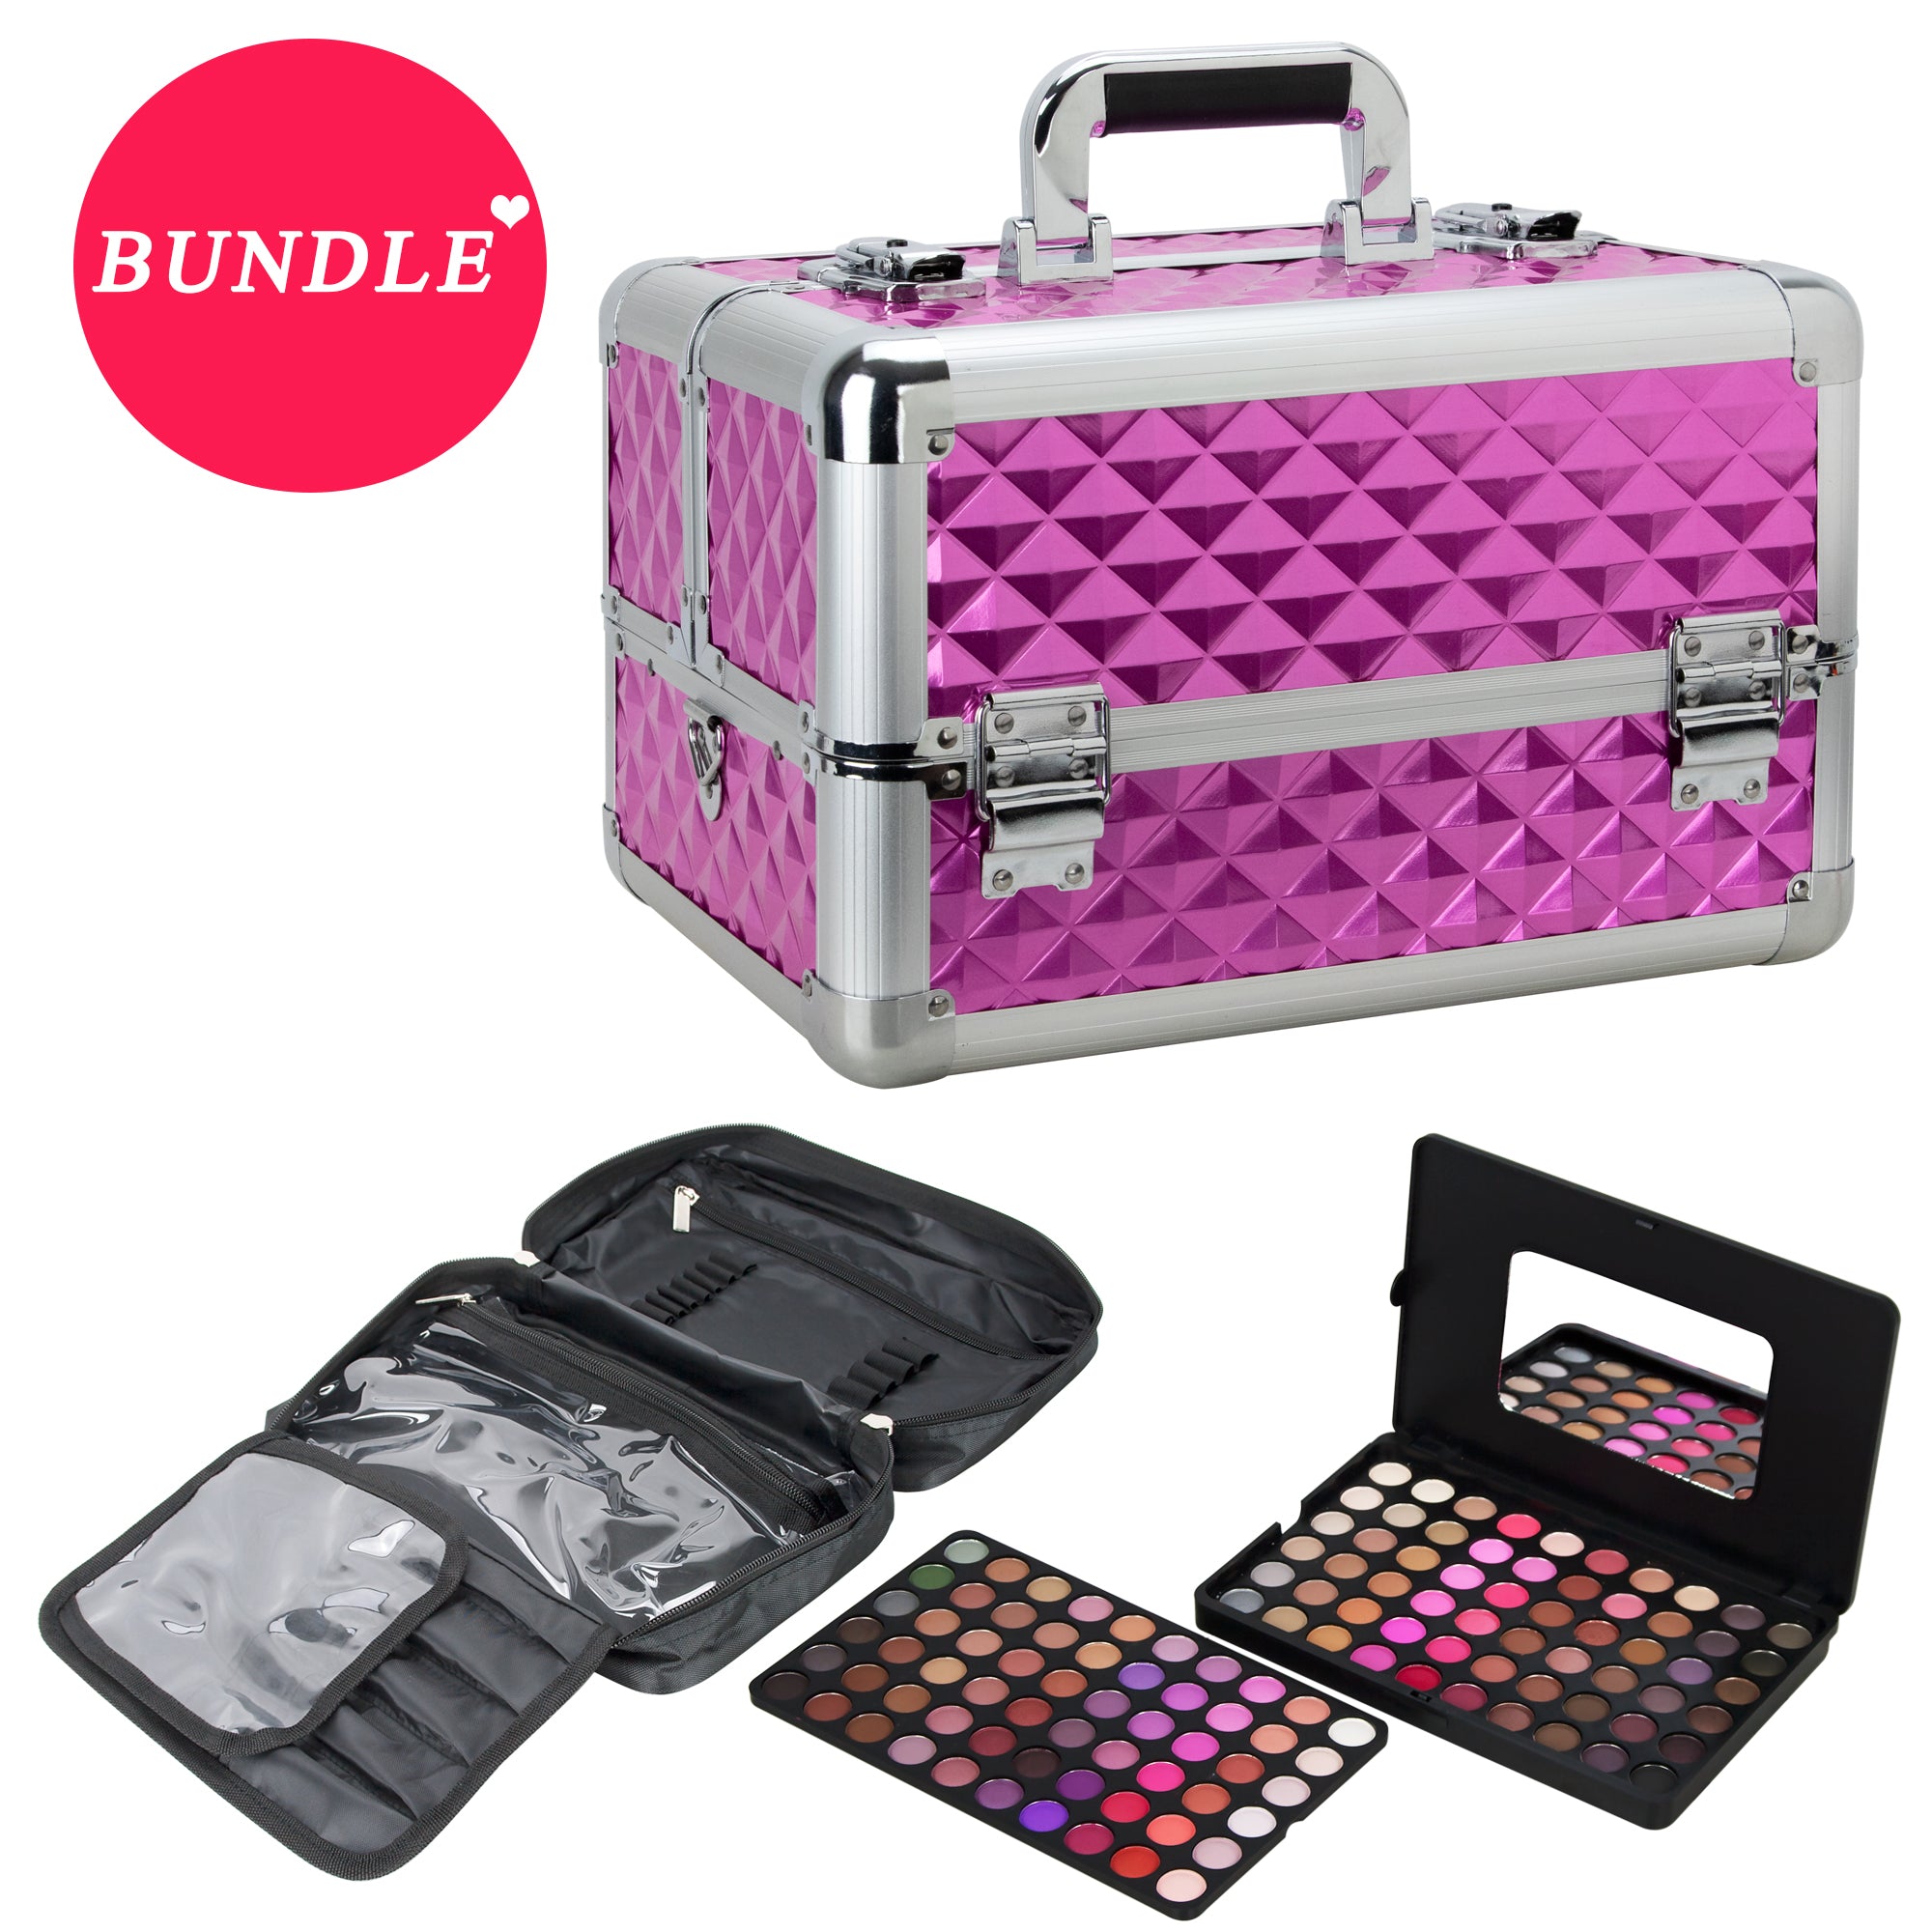 MDG SCP001- Makeup Case Organizer with Travel Organizer and Makeup